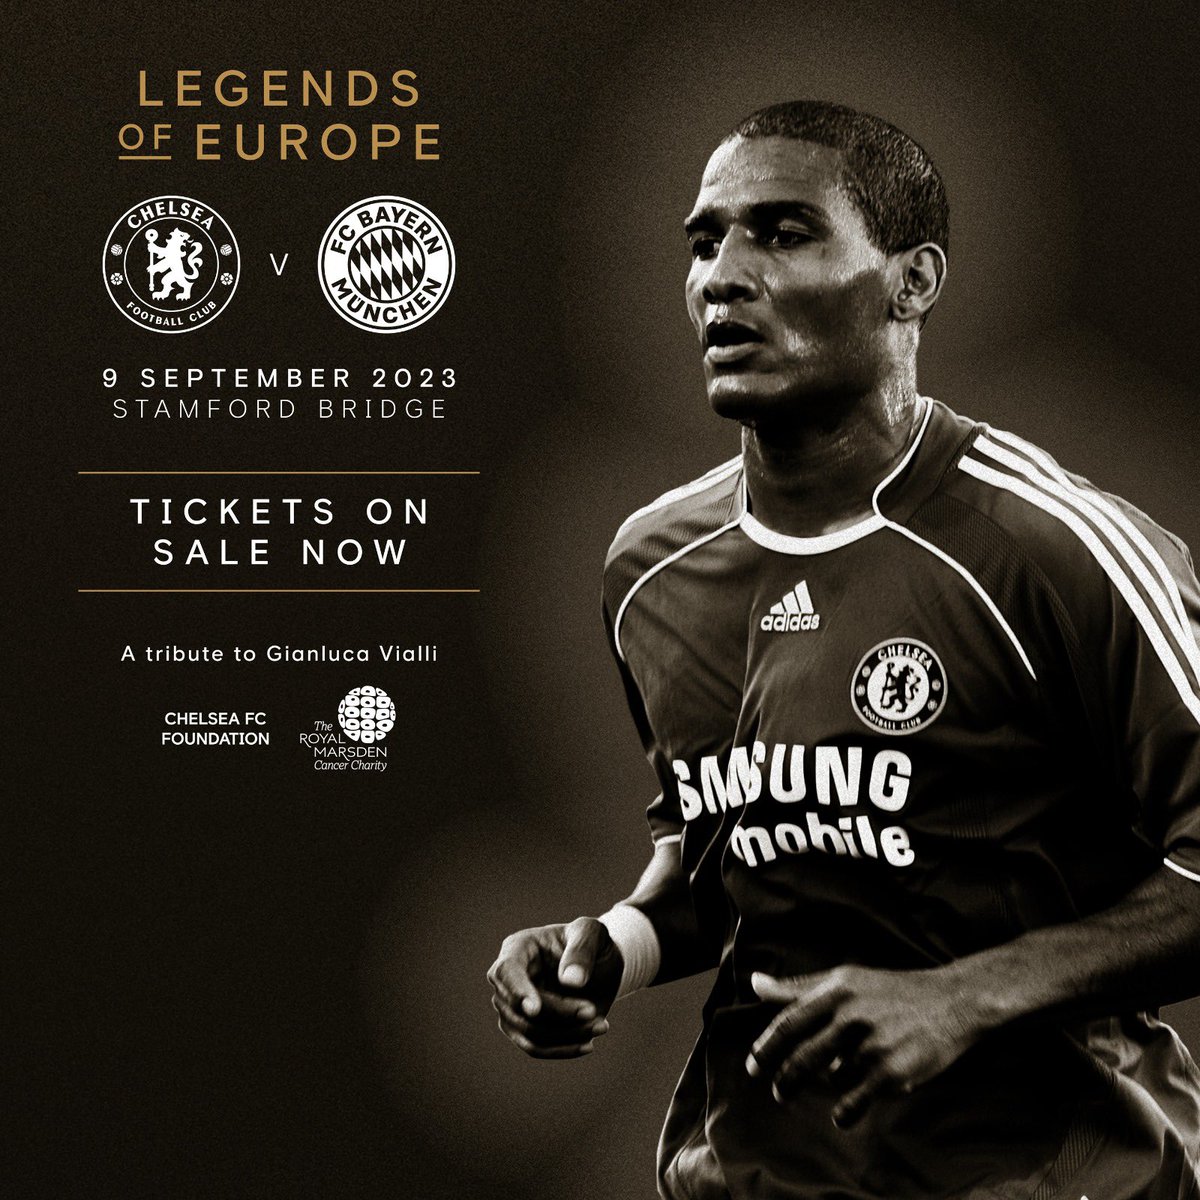 On my way to London to join @Chelseafc legends this Saturday. All proceeds of the Game will be split between @chelseafcfoundation and the @royalmarsden chelseafc.com/en/chelsea-leg…